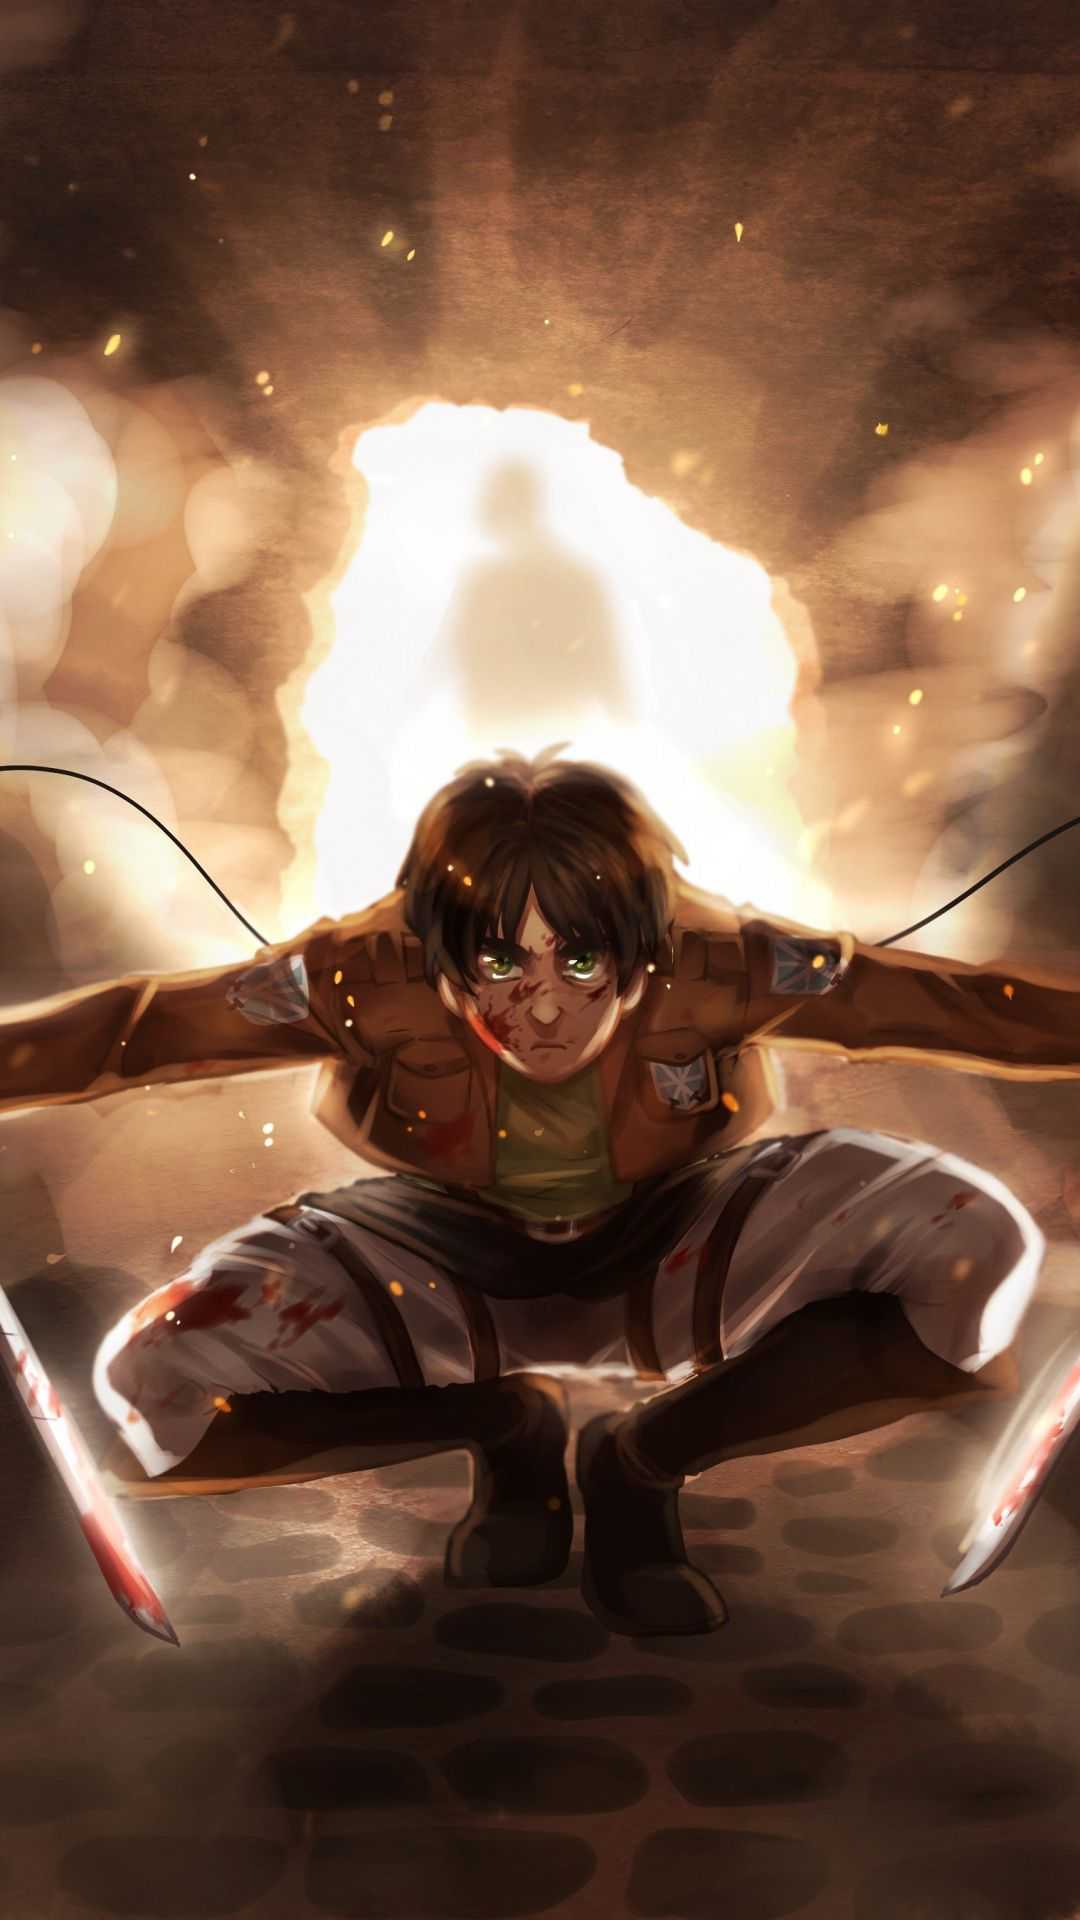 Attack On Titan Wallpaper - KoLPaPer - Awesome Free HD Wallpapers